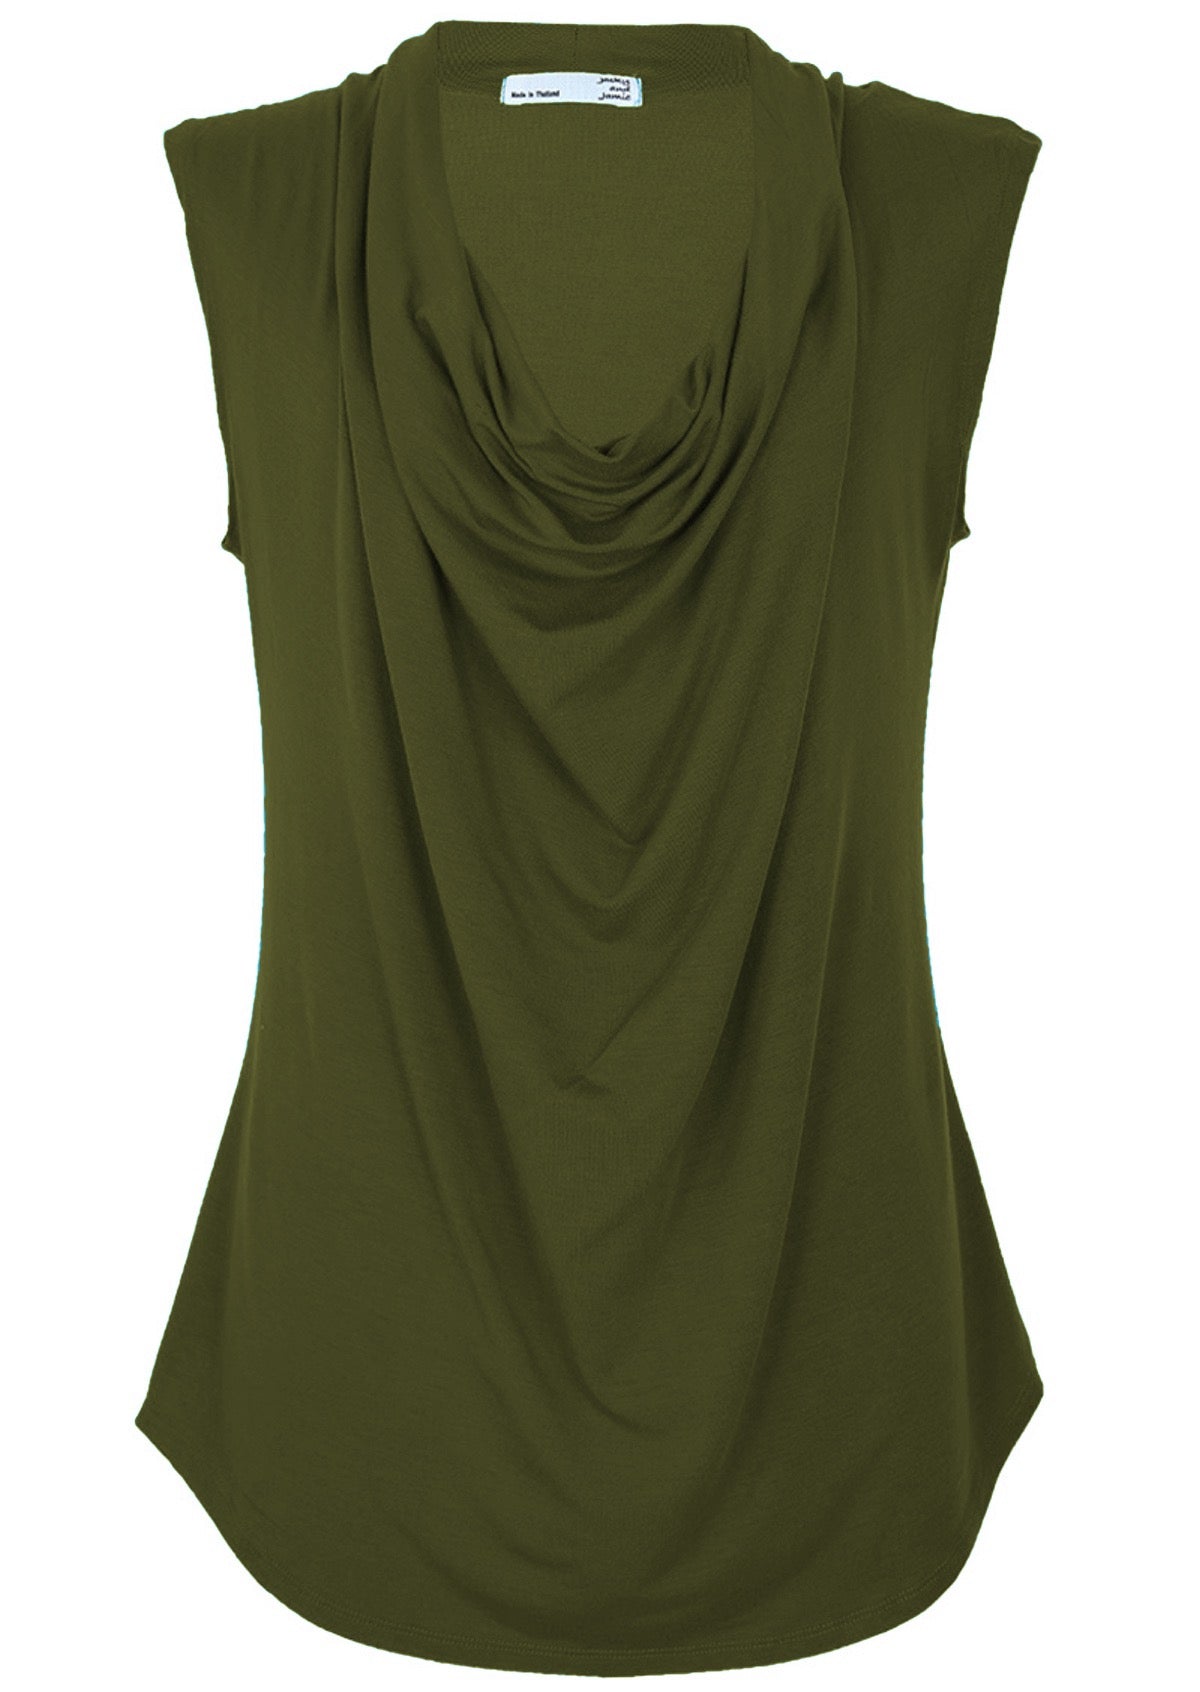 Front view of women's cowl neck rayon olive cap sleeve top over white background.